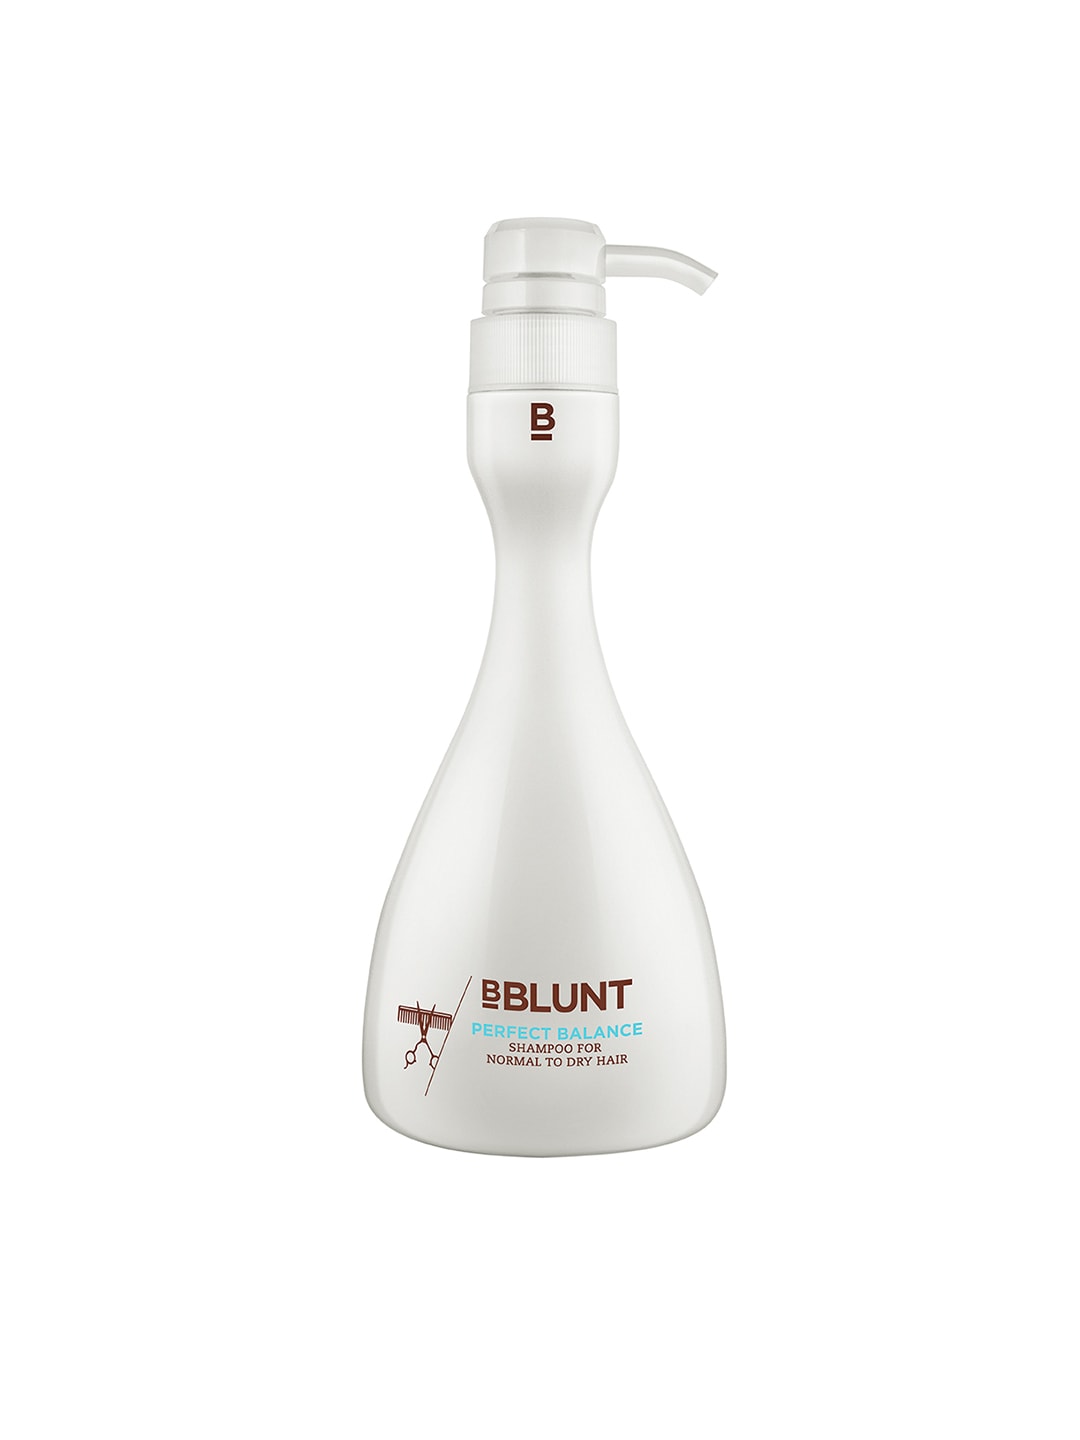 BBLUNT Perfect Balance Shampoo For Normal To Dry Hair 400 ml Price in India